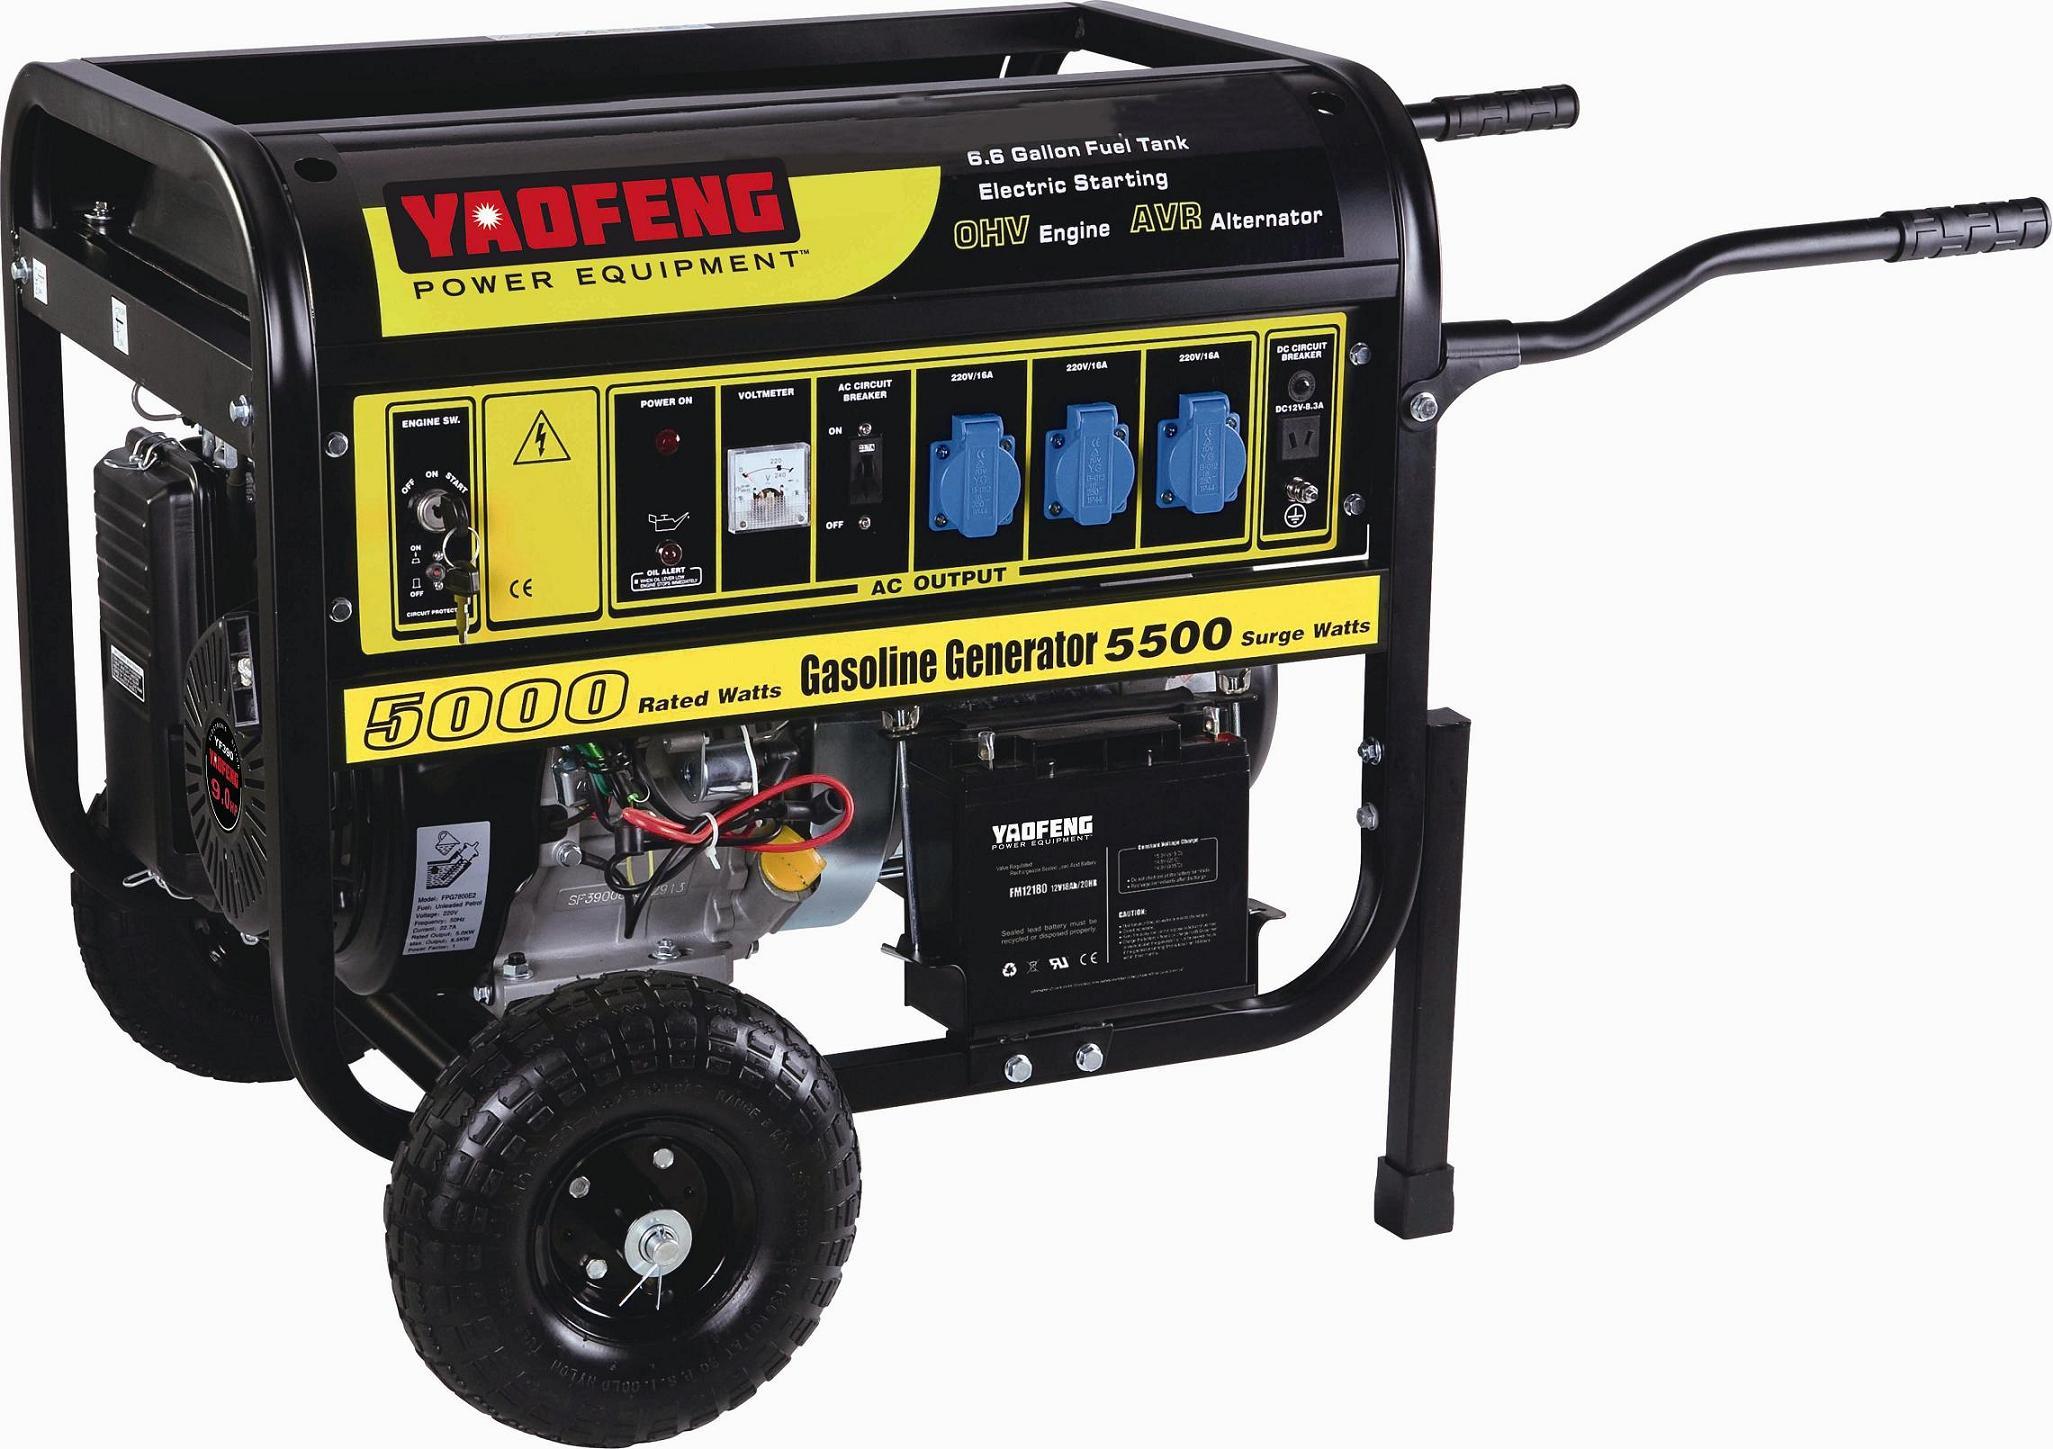 5000 Watts Electric Power Gasoline Generator with EPA, Carb, CE, Soncap Certificate (YFGF6500E2)